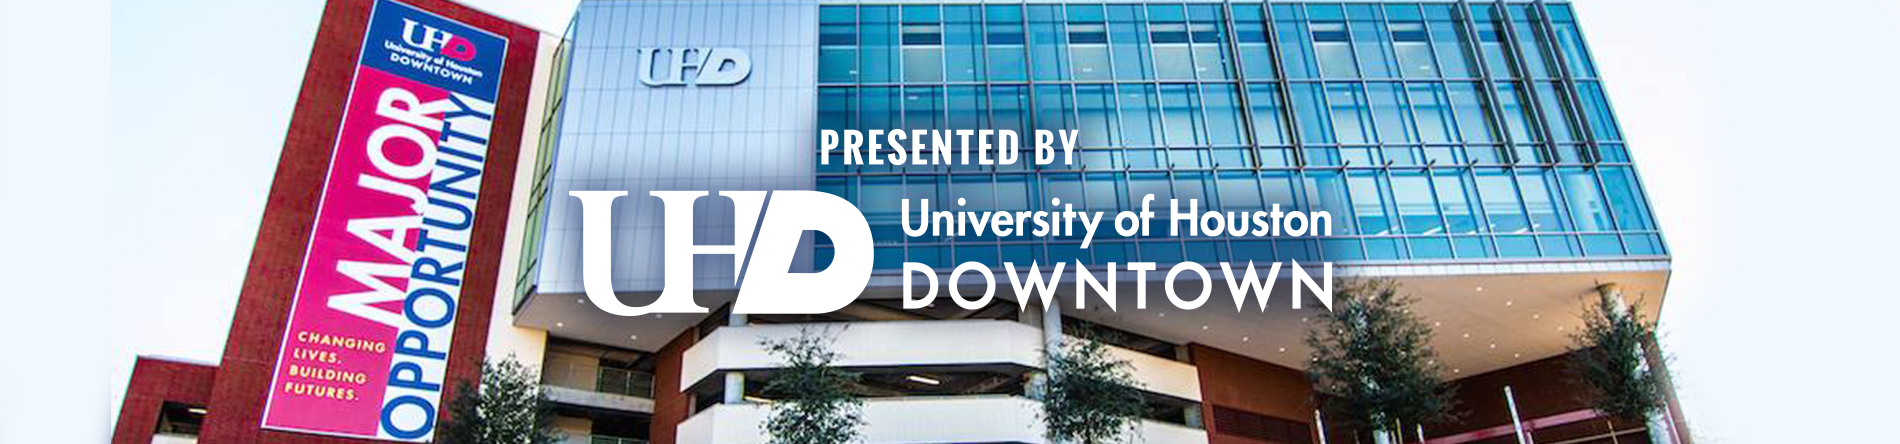 Presented by University of Houston Downtown